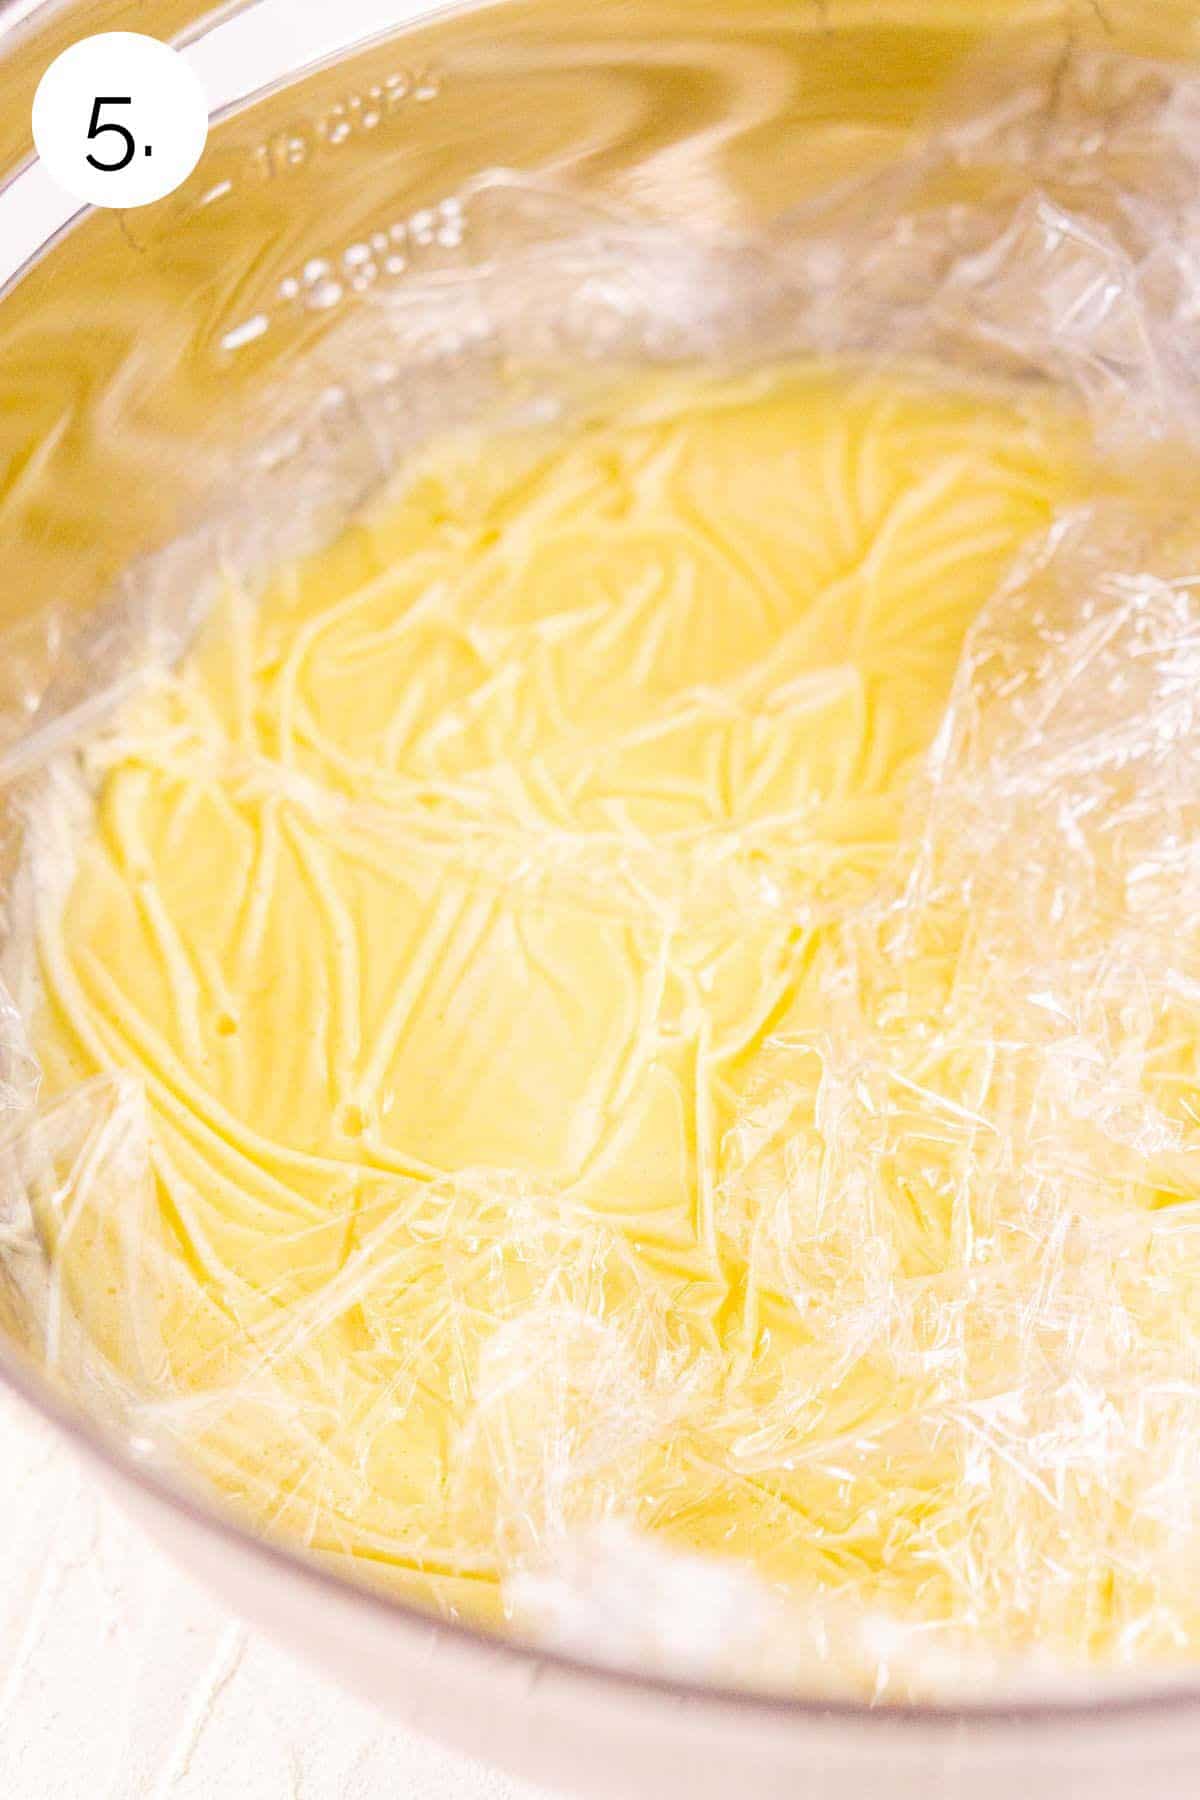 The ice cream base in a large mixing bowl with plastic wrap directly on the surface of the custard before refrigerating.